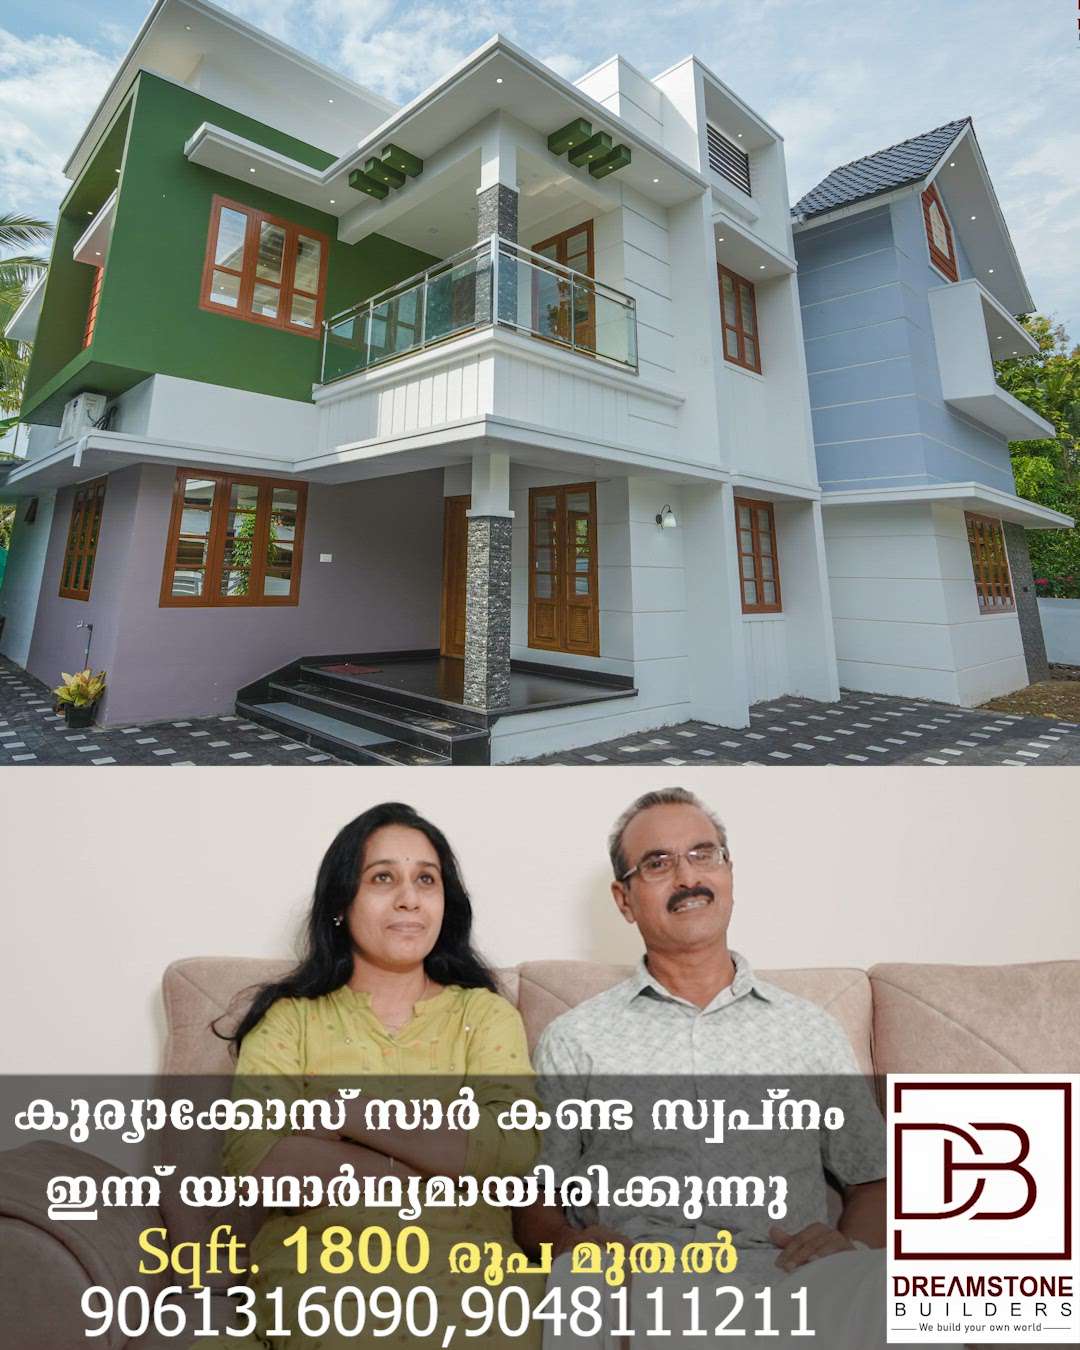 𝐂𝐨𝐦𝐩𝐥𝐞𝐭𝐞𝐝 𝐩𝐫𝐨𝐣𝐞𝐜𝐭 🥰🏡

𝗖𝗹𝗶𝗲𝗻𝘁   : 𝗞 𝗩 𝗸𝘂𝗿𝗶𝗮𝗸𝗼𝘀𝗲
𝗦𝗾𝗳𝘁       :𝟮𝟯𝟳𝟳( 𝟰 𝗕𝗛𝗞)
𝗣𝗹𝗮𝗰𝗲     : 𝗻𝗲𝗱𝘂𝗺𝗯𝗮𝘀𝘀𝗲𝗿𝘆, 𝗲𝗿𝗻𝗮𝗸𝘂𝗹𝗮𝗺

𝗗𝗲𝘁𝗮𝗶𝗹𝘀 𝘄𝗶𝗹𝗹 𝗰𝗼𝗺𝗶𝗻𝗴 𝘀𝗼𝗼𝗻🔜

 #completed_house_construction #completed🎊😍